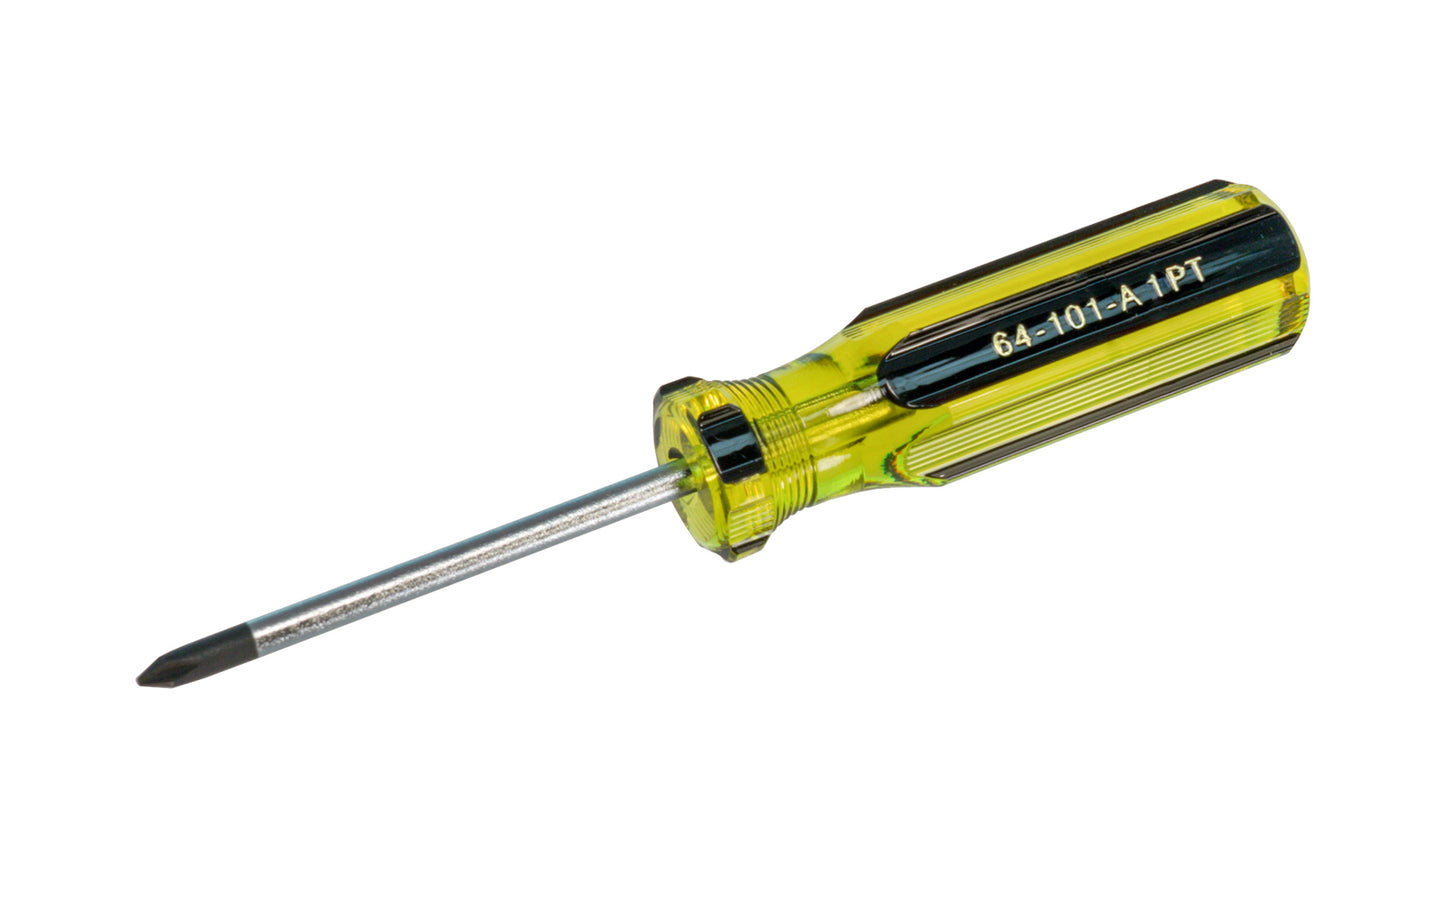 Stanley "100 Plus" No. 1 Phillips Screwdriver is great for heavy-duty applications. Model 64-101-A. Screwdriver has magnetic black oxide tip allows secure grip on fasteners. Precision cold formed tips provide high torque performance. 100% acetate handle stands up to heavy industrial use. #1 Phillips Stanley Screwdriver